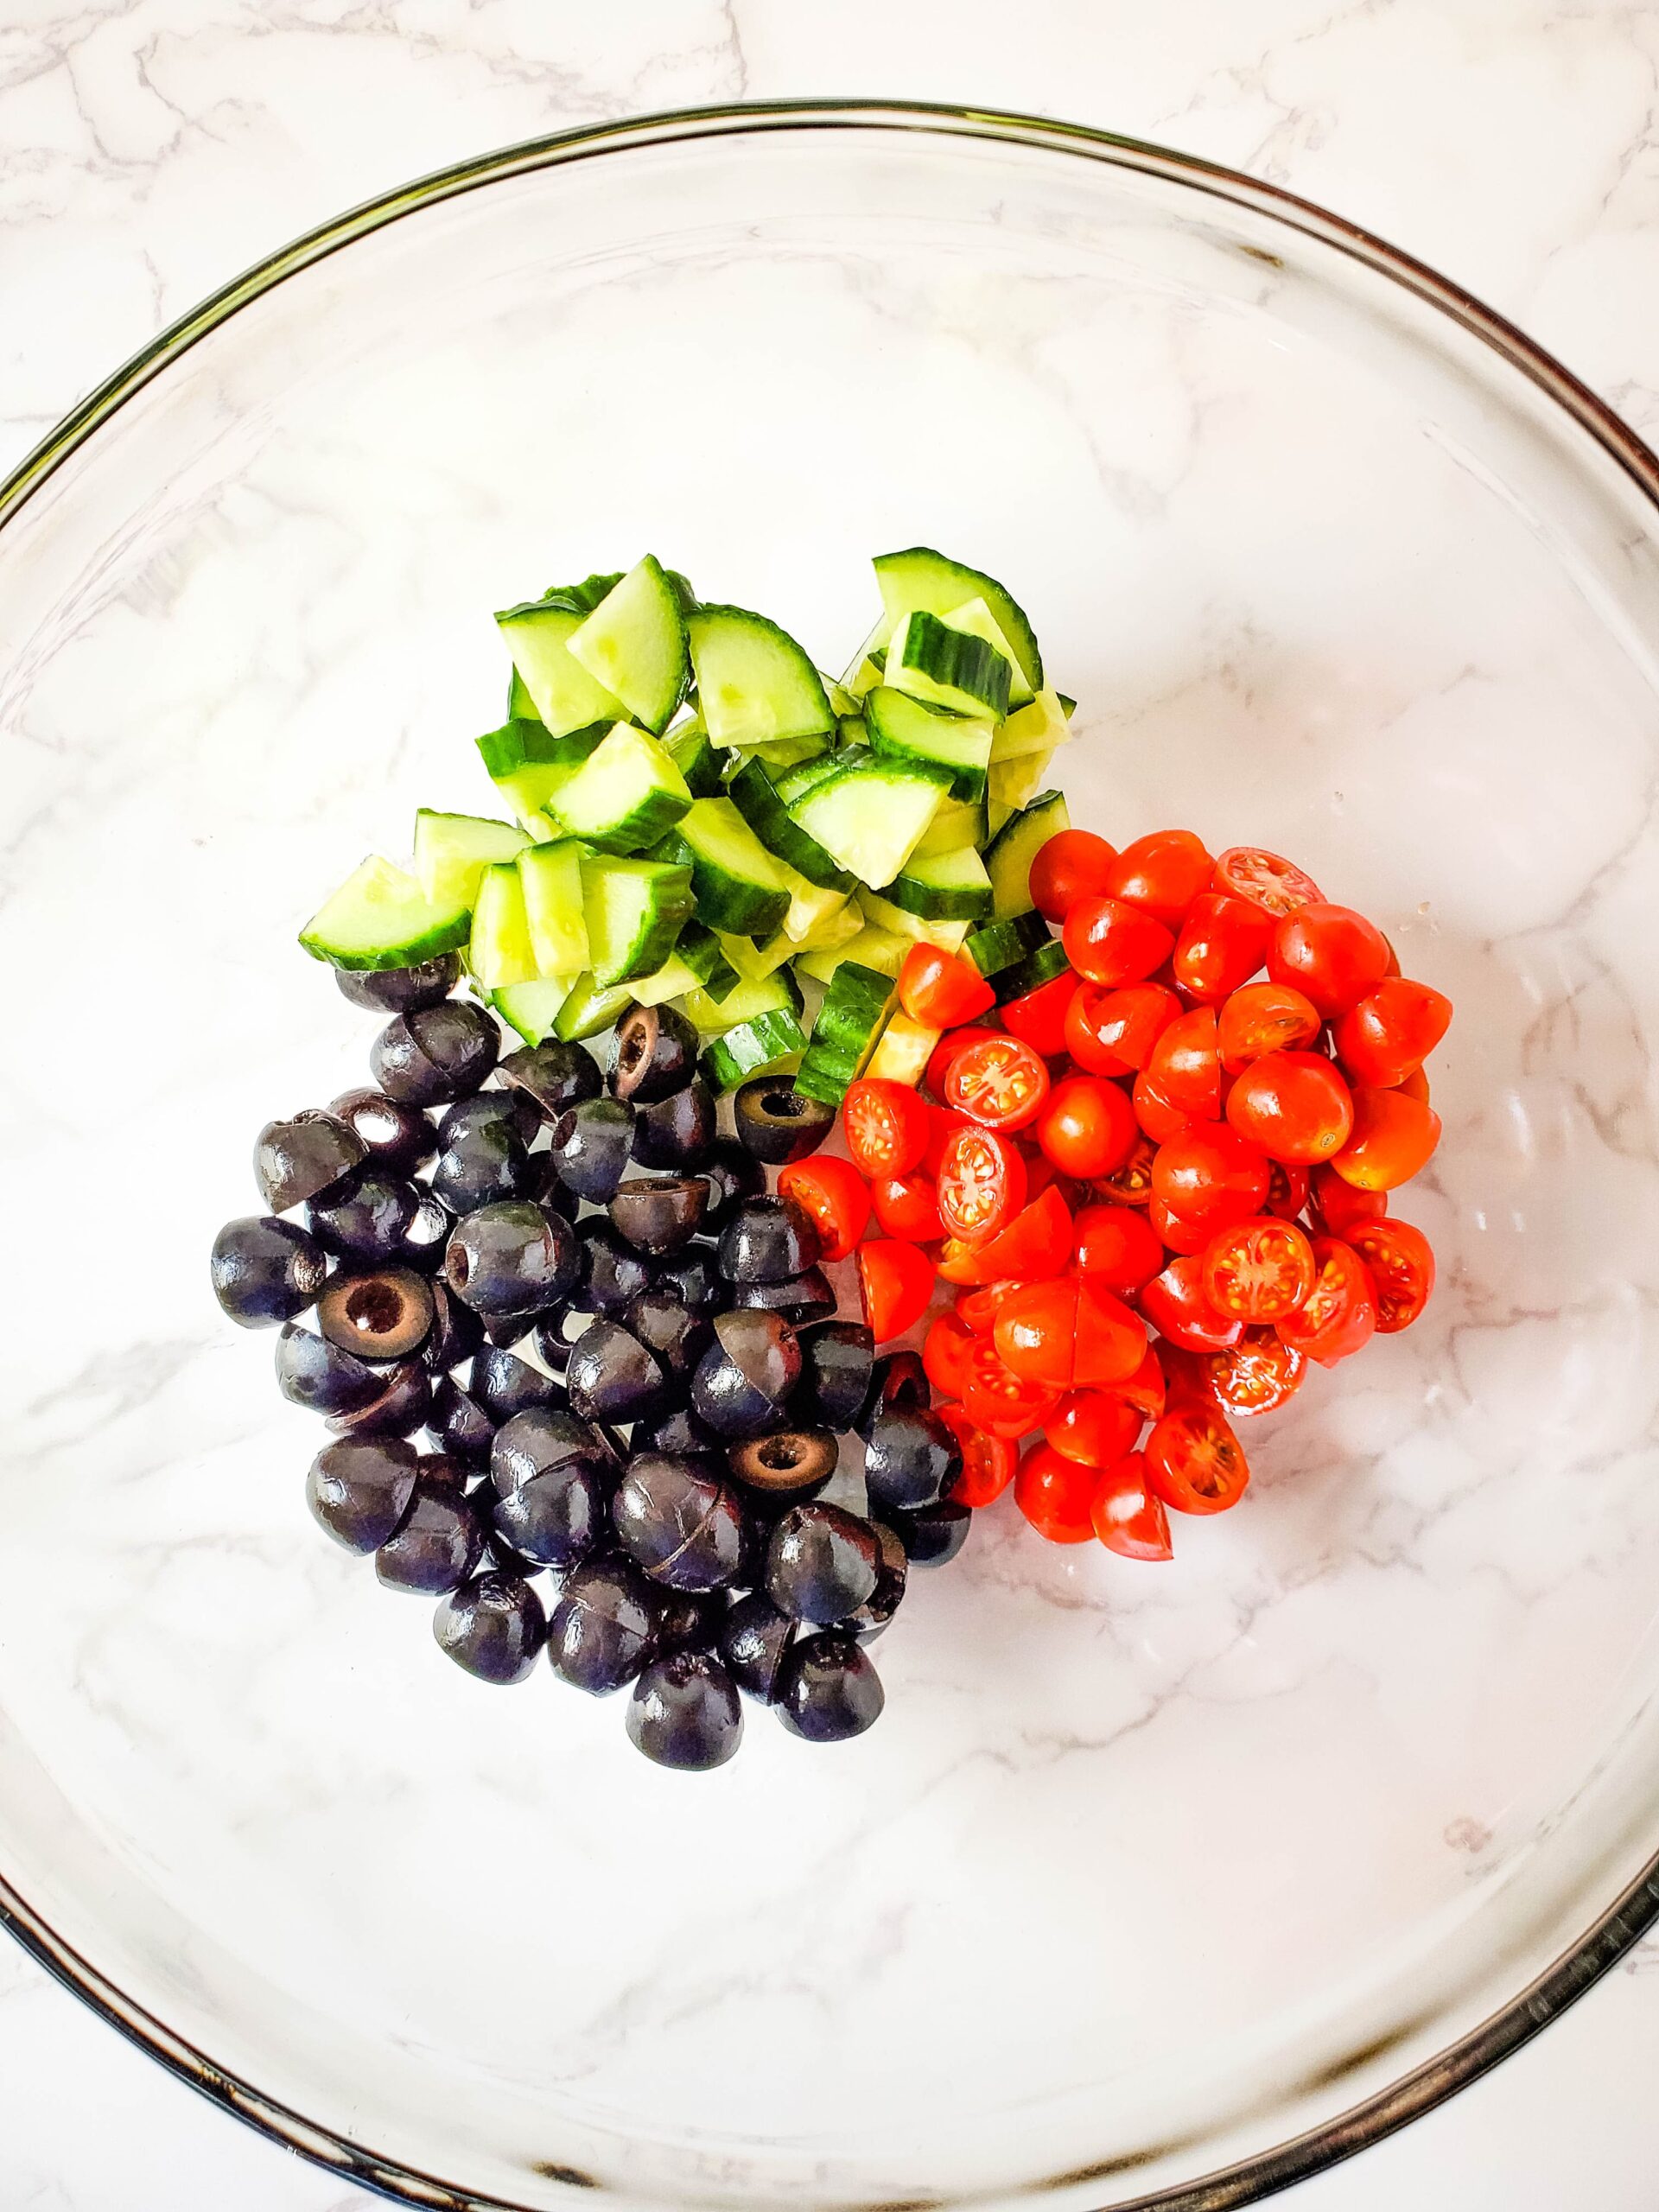 A glass bowl sitting on a white marbled countertop is filled with sliced cucumbers, tomatoes and black olives